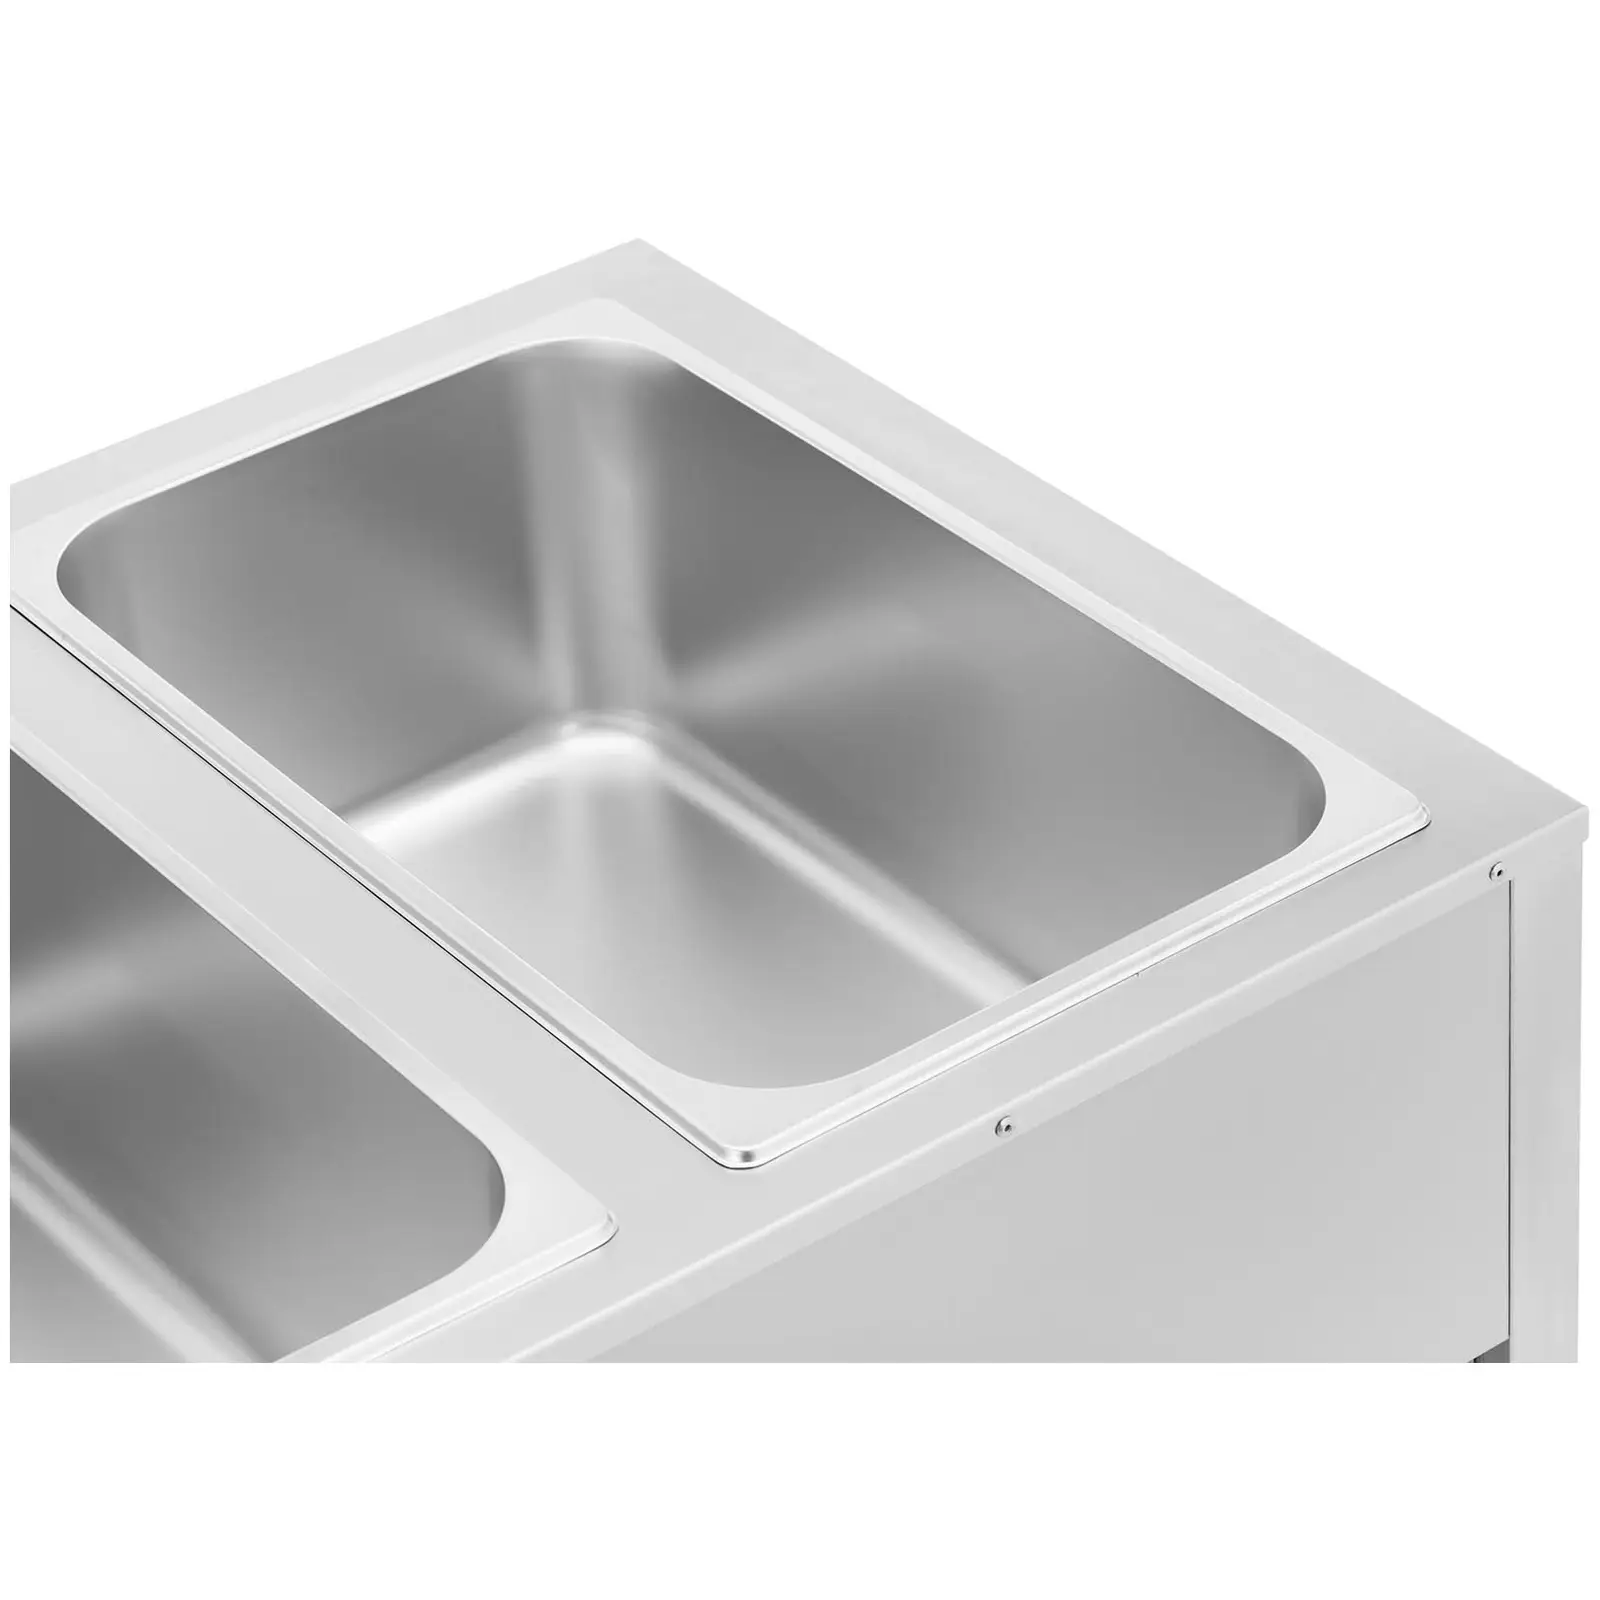 Bagnomaria - 1265 W - 2 x GN 1/1 - Con base - Royal Catering